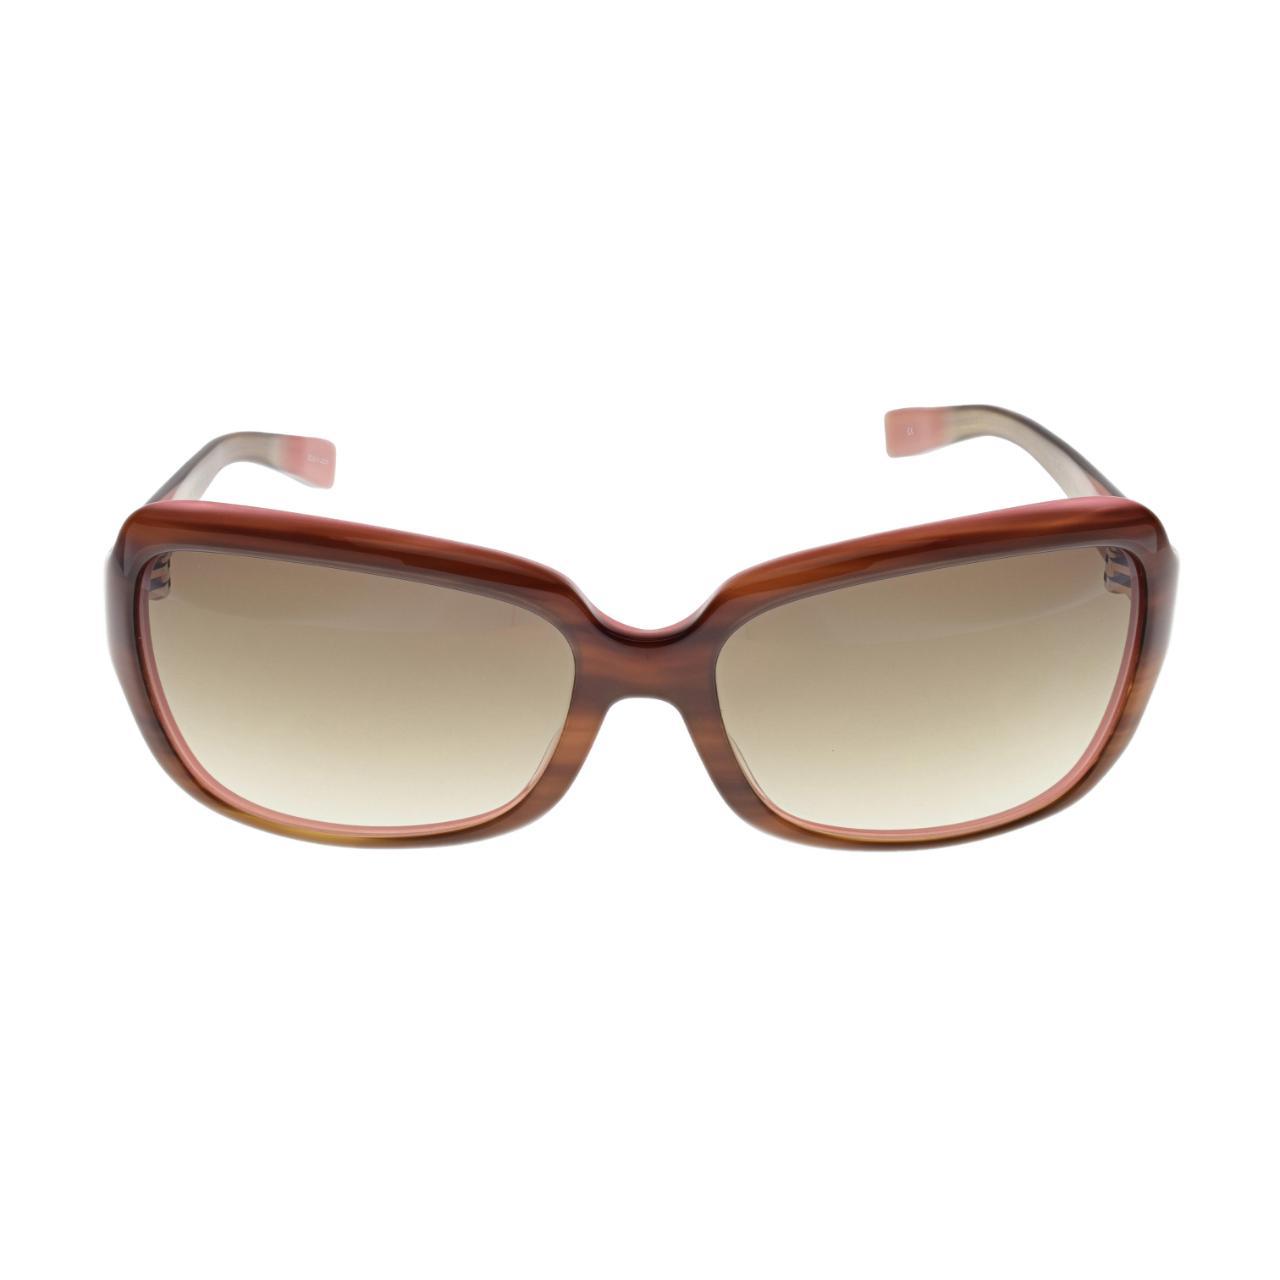 Oliver Peoples Women's Brown Sunglasses (2)